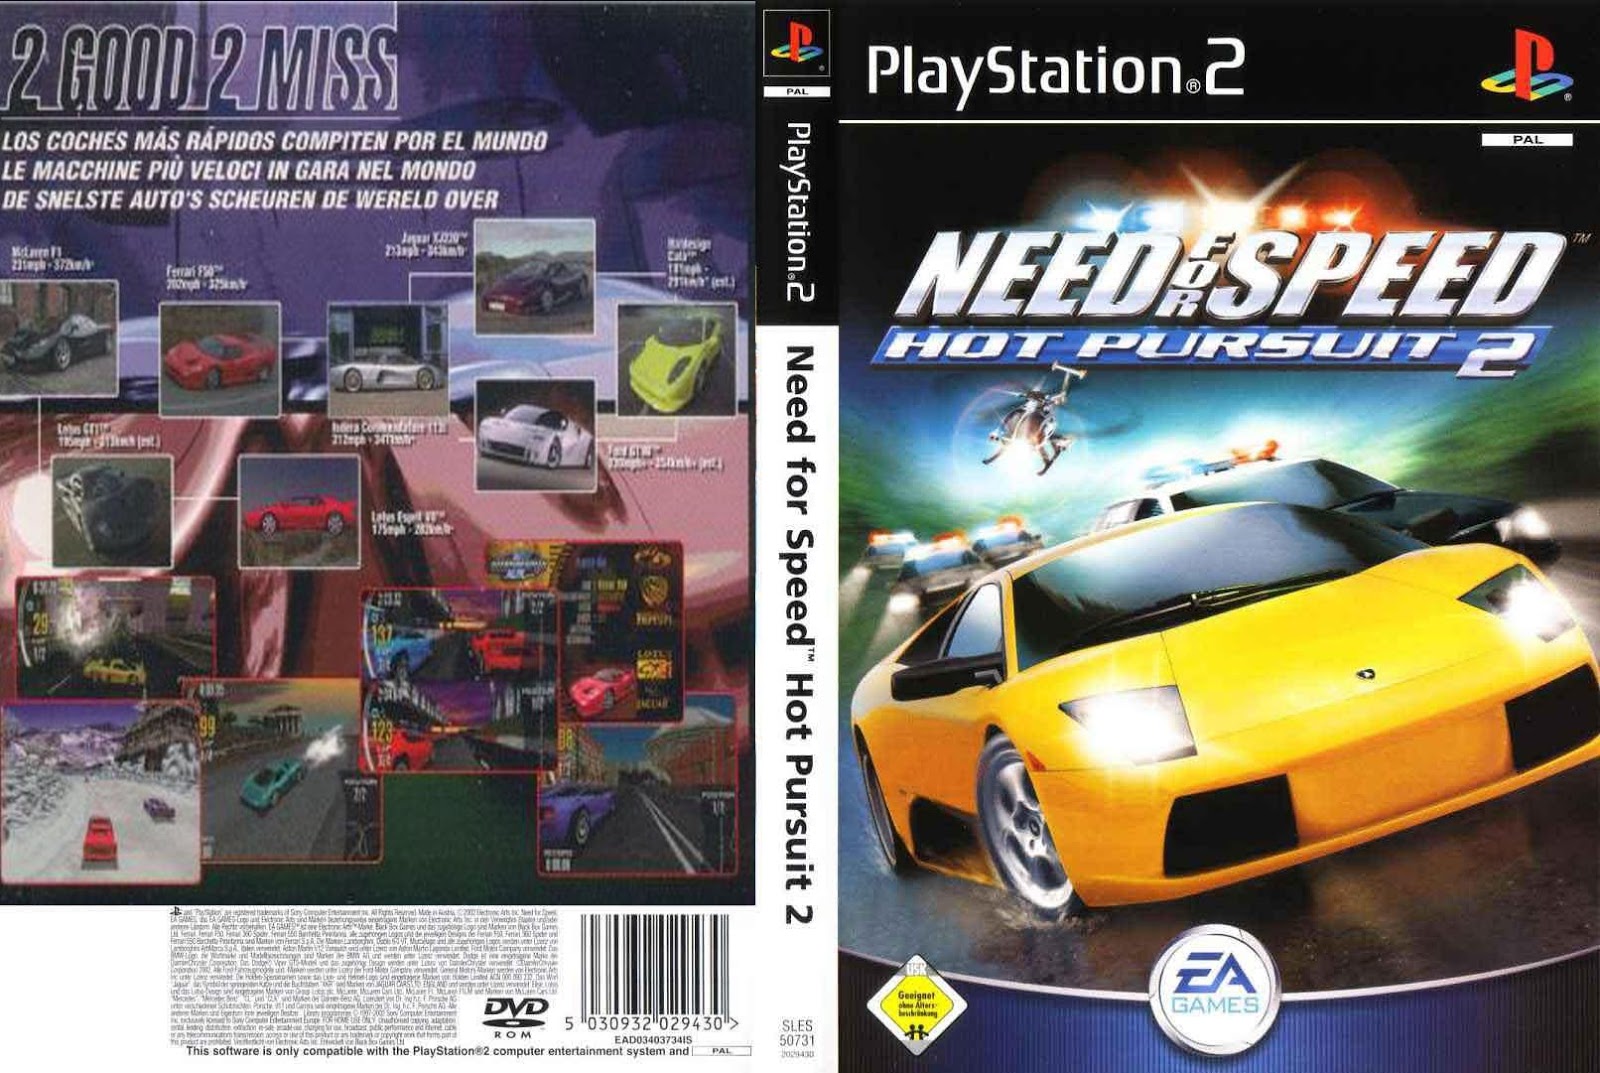 Playstation 2 русский язык. Ps2 диск need for Speed. Hot Pursuit 2 PLAYSTATION 2. Hot Pursuit 2002 ps2. Need for Speed hot Pursuit 2 ps2 лицензия.